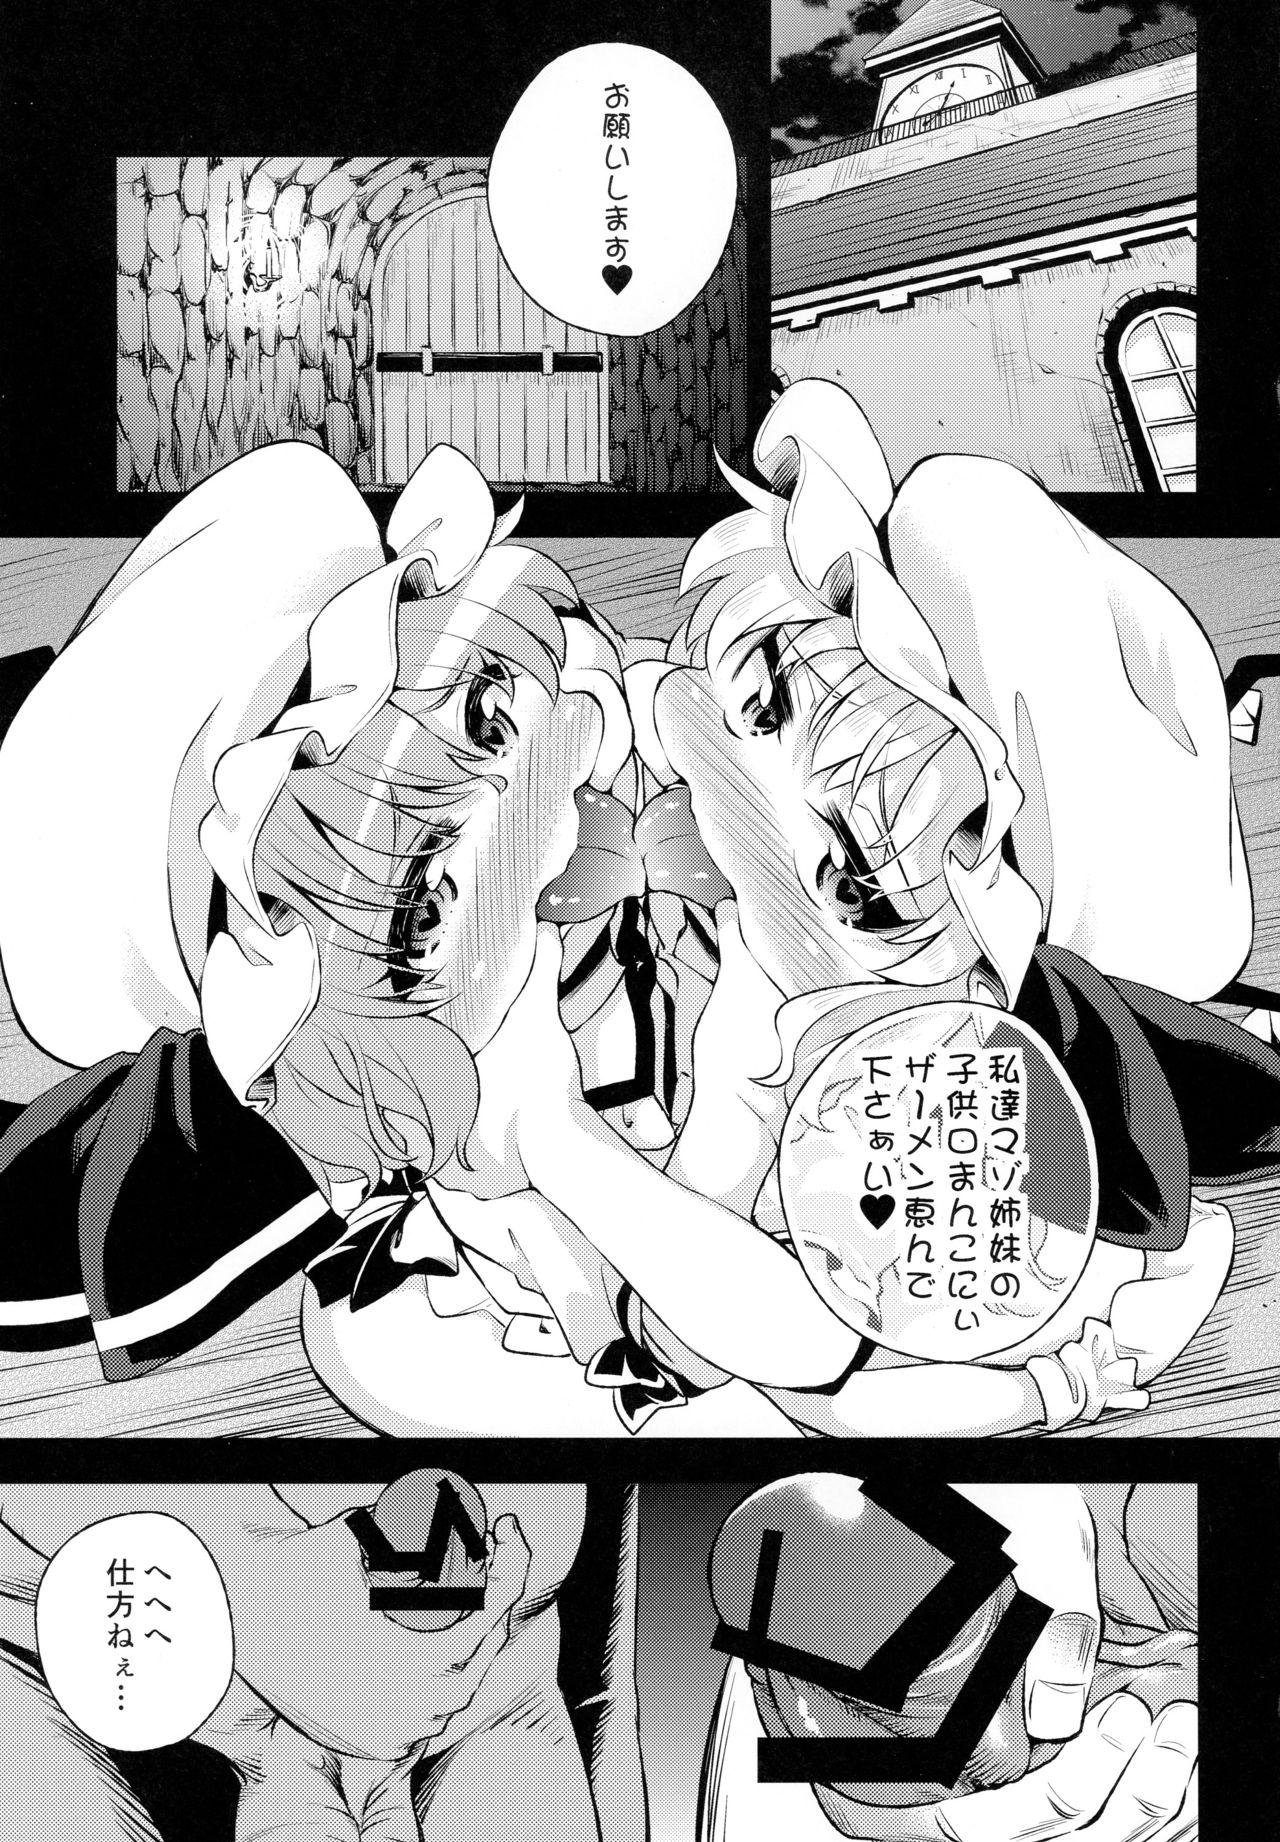 Head Scarlet Hearts 4 - Touhou project Sologirl - Page 4